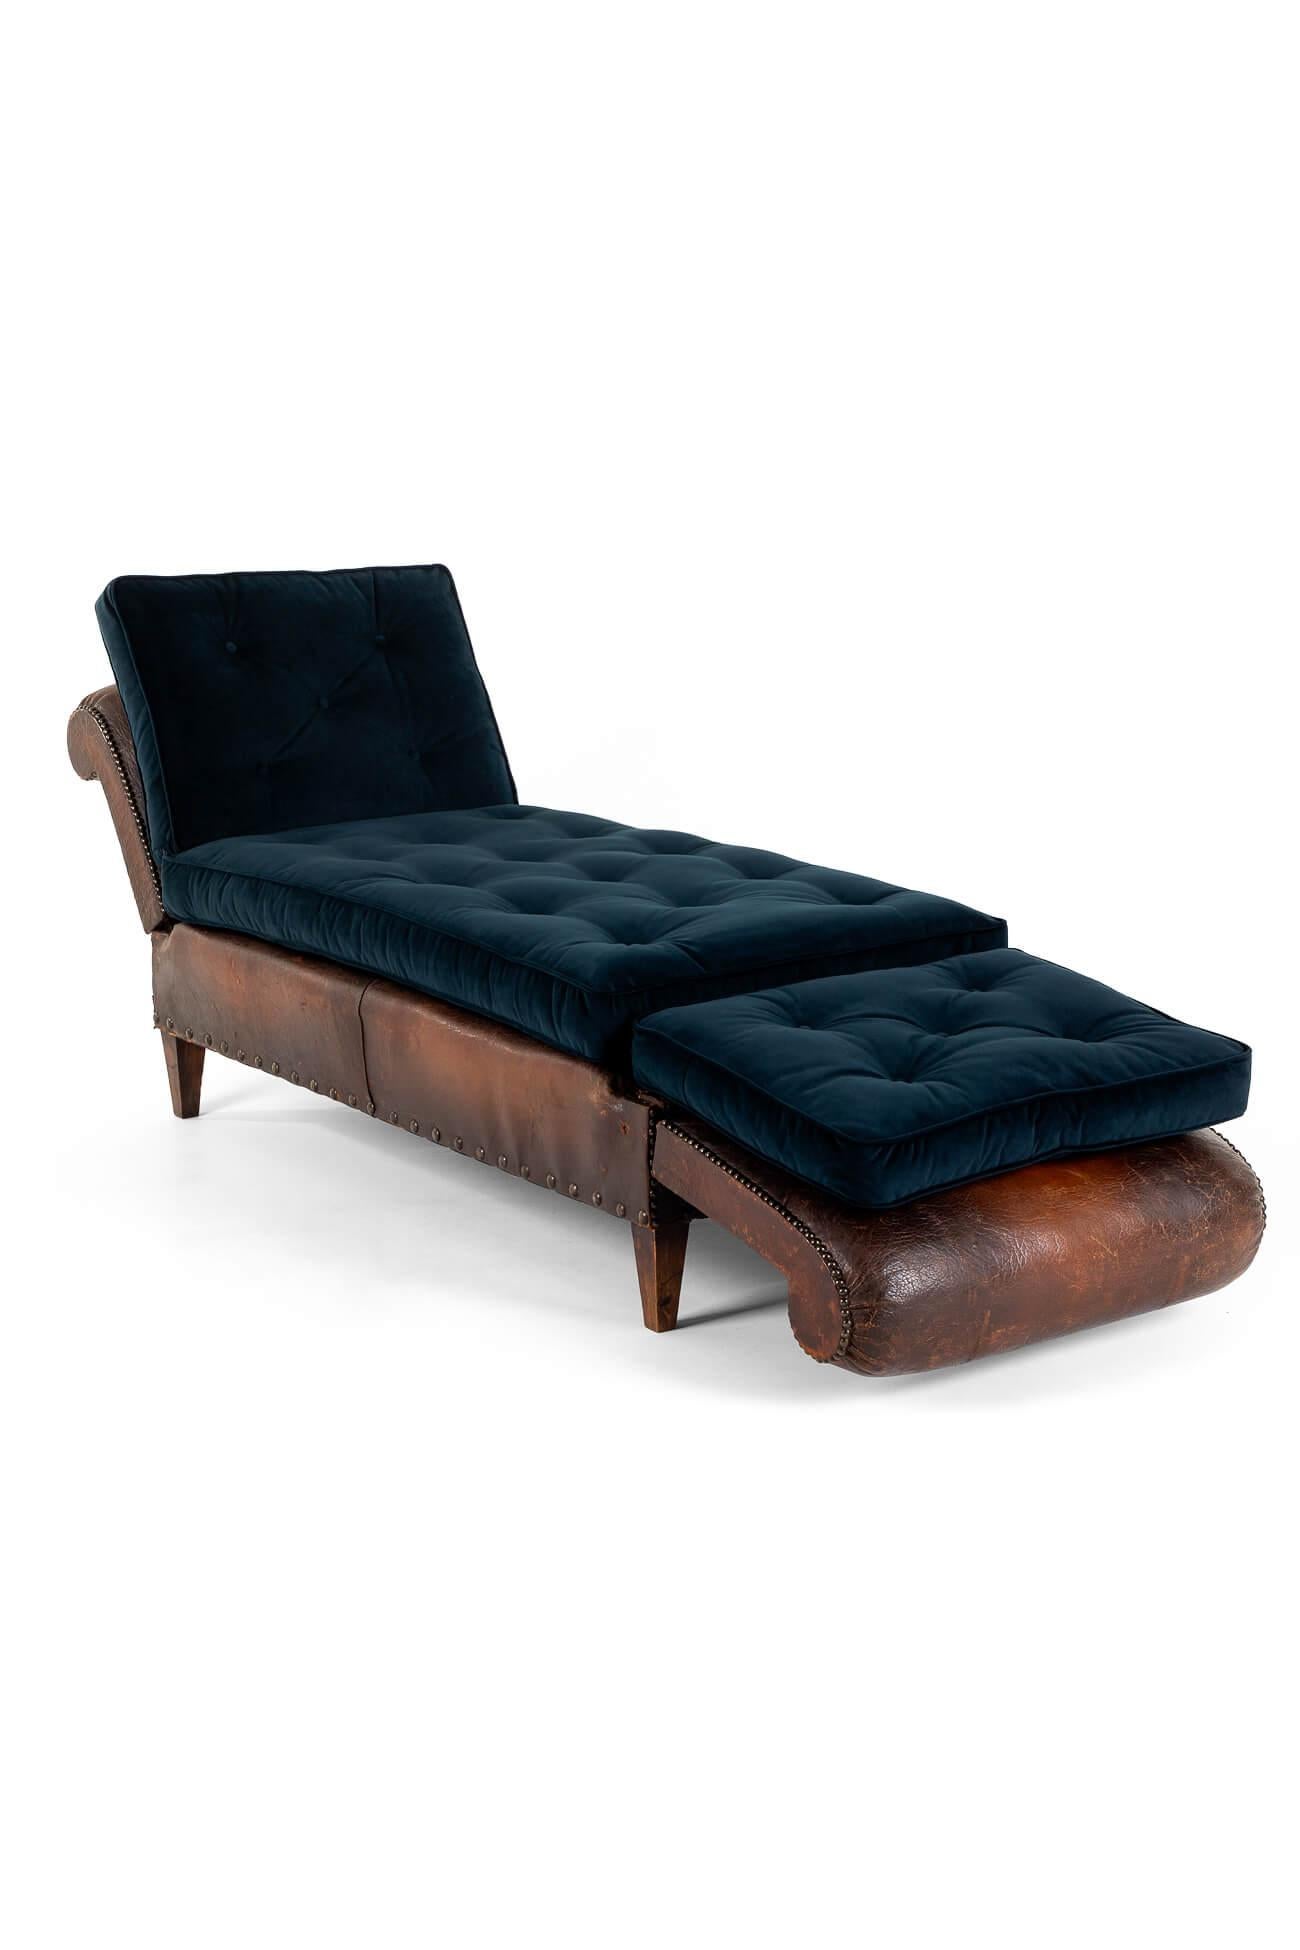 Hand-Crafted French Leather Daybed For Sale